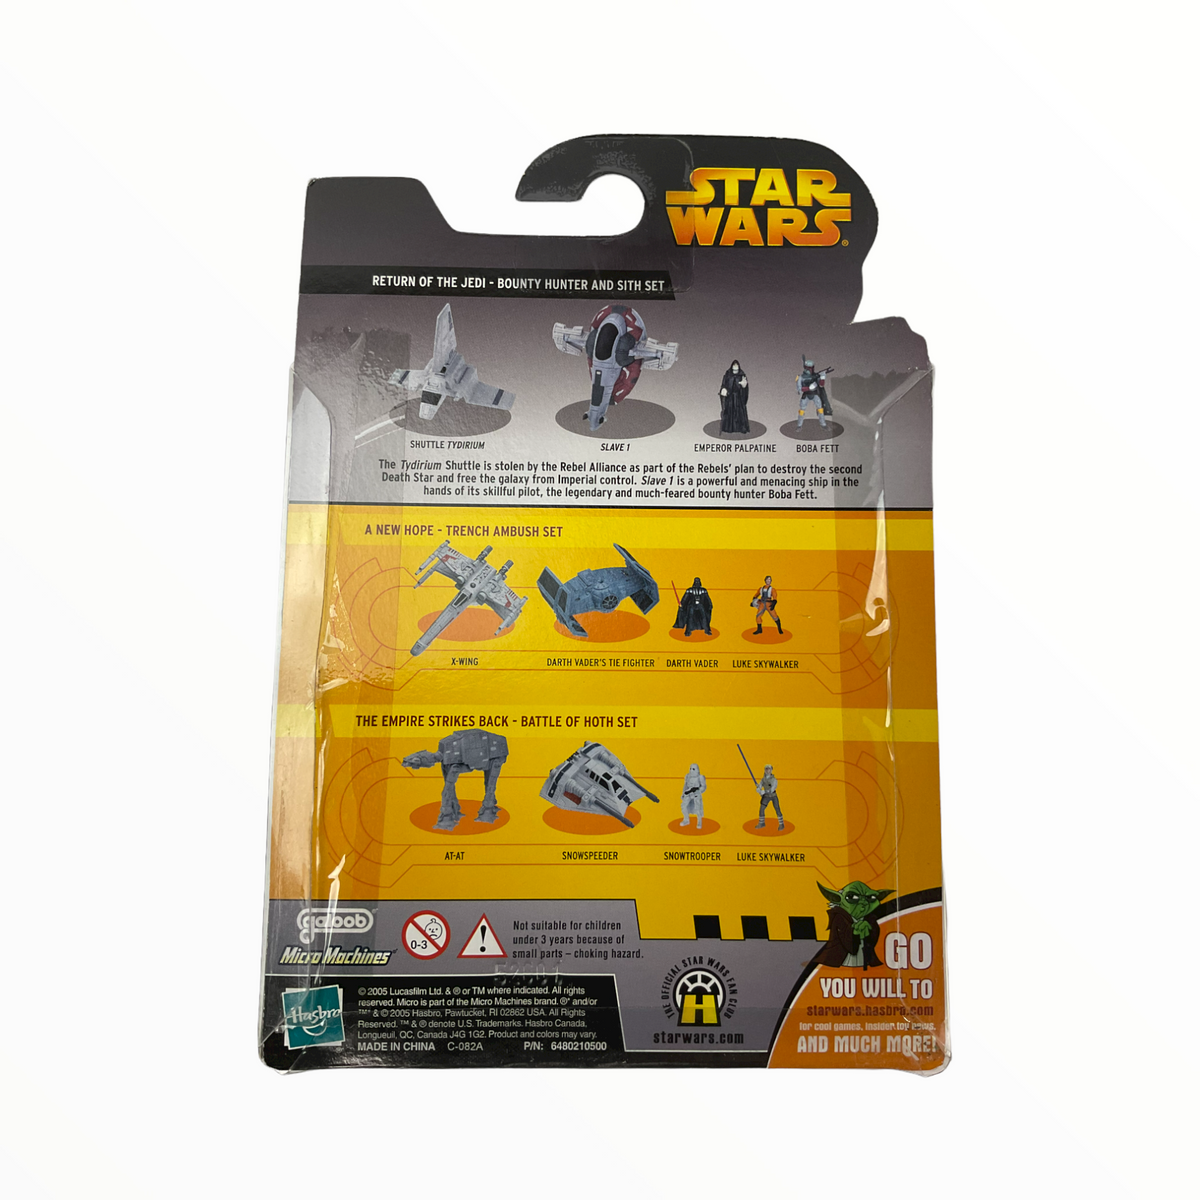 Star Wars Micro Vehicles X-Wing and Darth Vaders Tie Fighter Luke Skywalker and Darth Vader